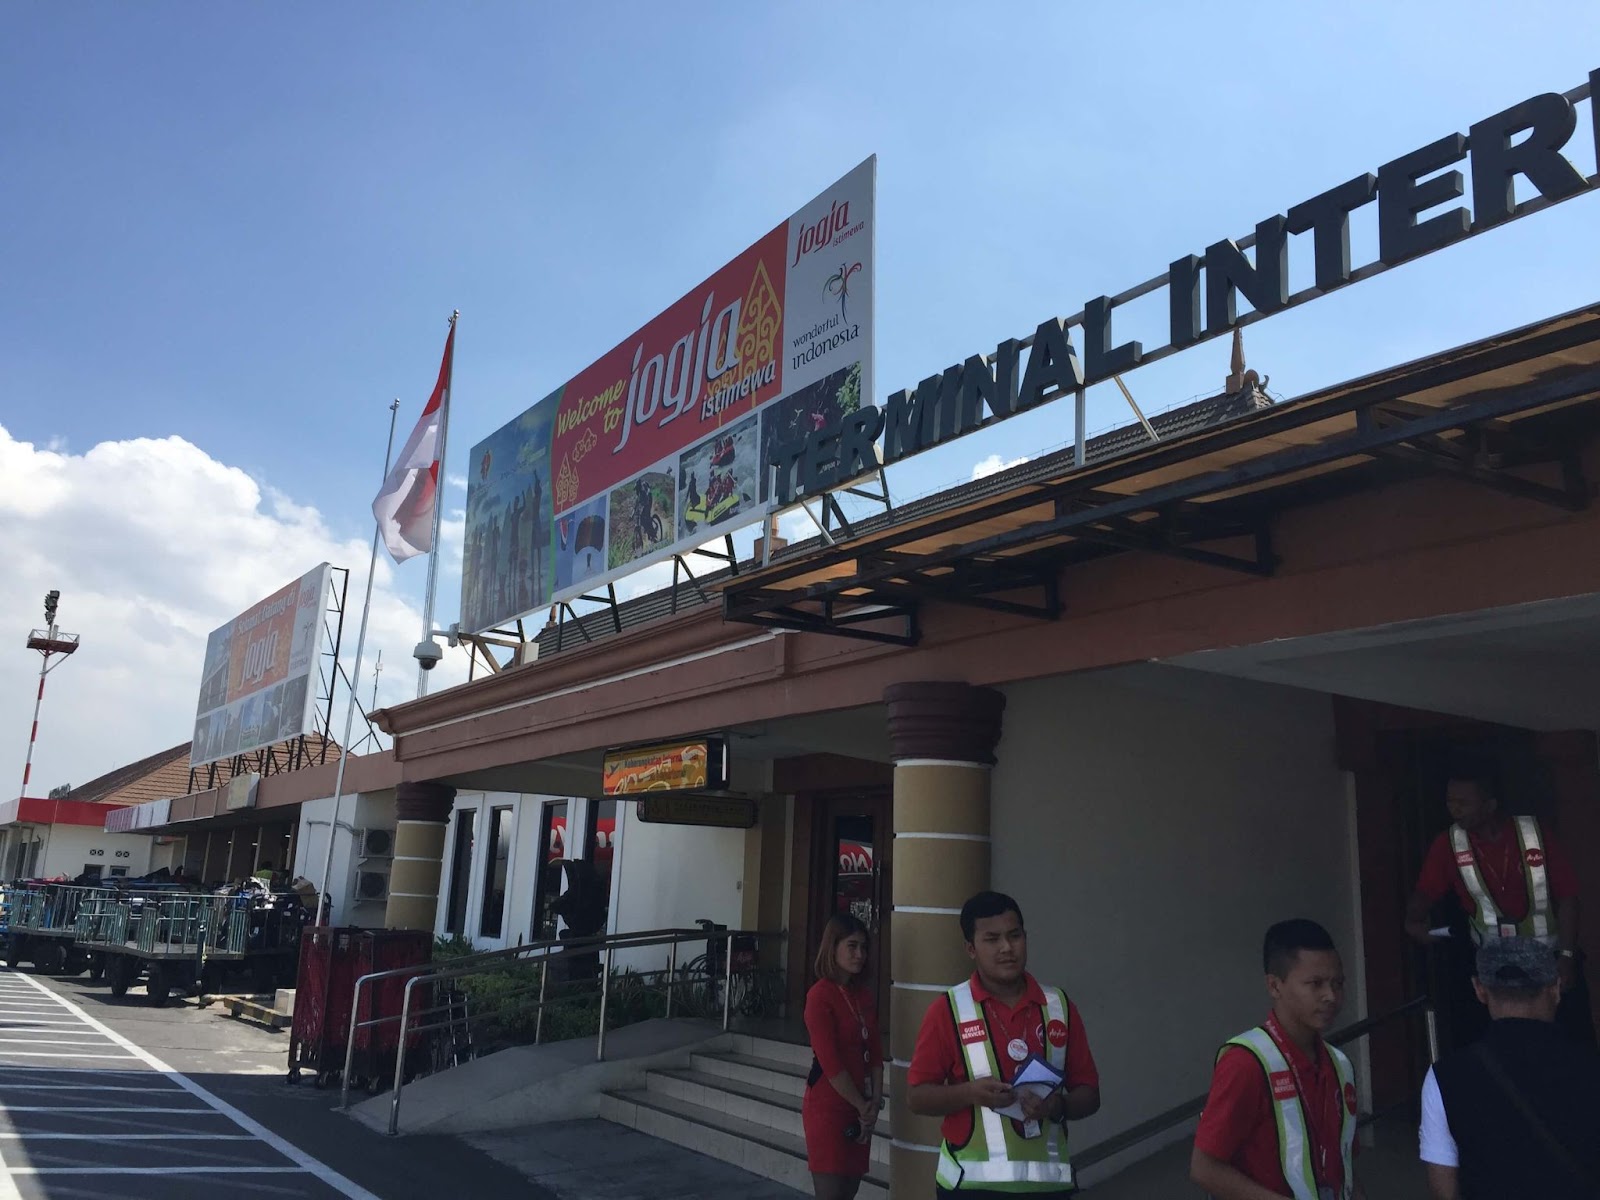 3 days in Yogyakarta, our arrival terminal for international flights at Yogyakarta Airport. This is the older Adisucipto Airport which has already been replaced by the newer Yogyakarta International Airport.